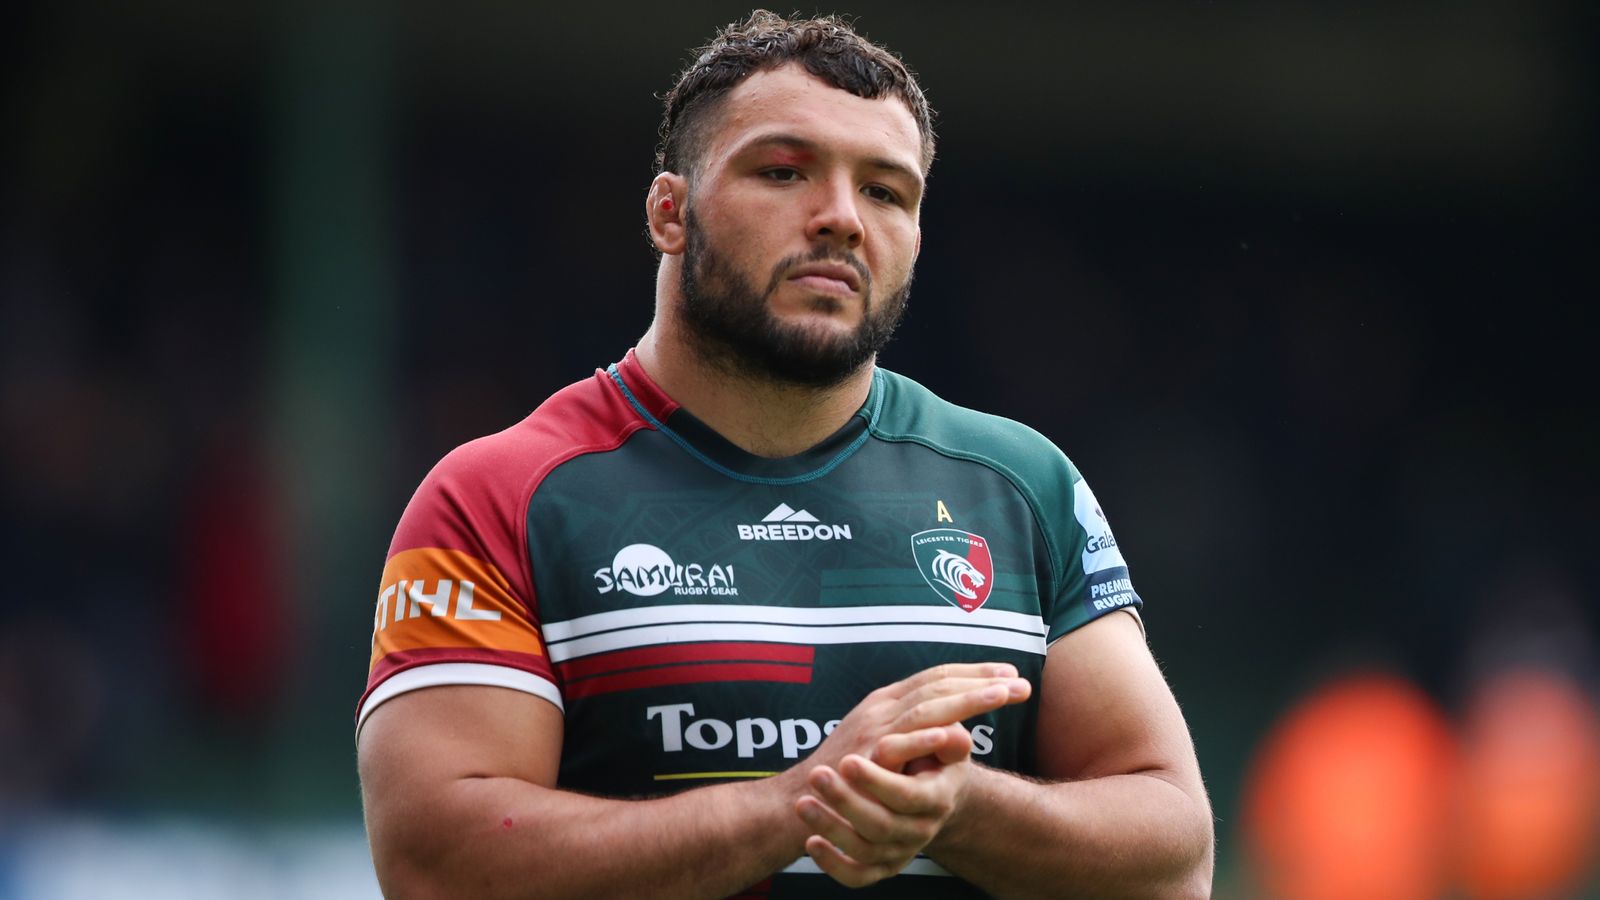 England & Leicester Tigers’ Ellis Genge racially abused on social media after Premiership final win